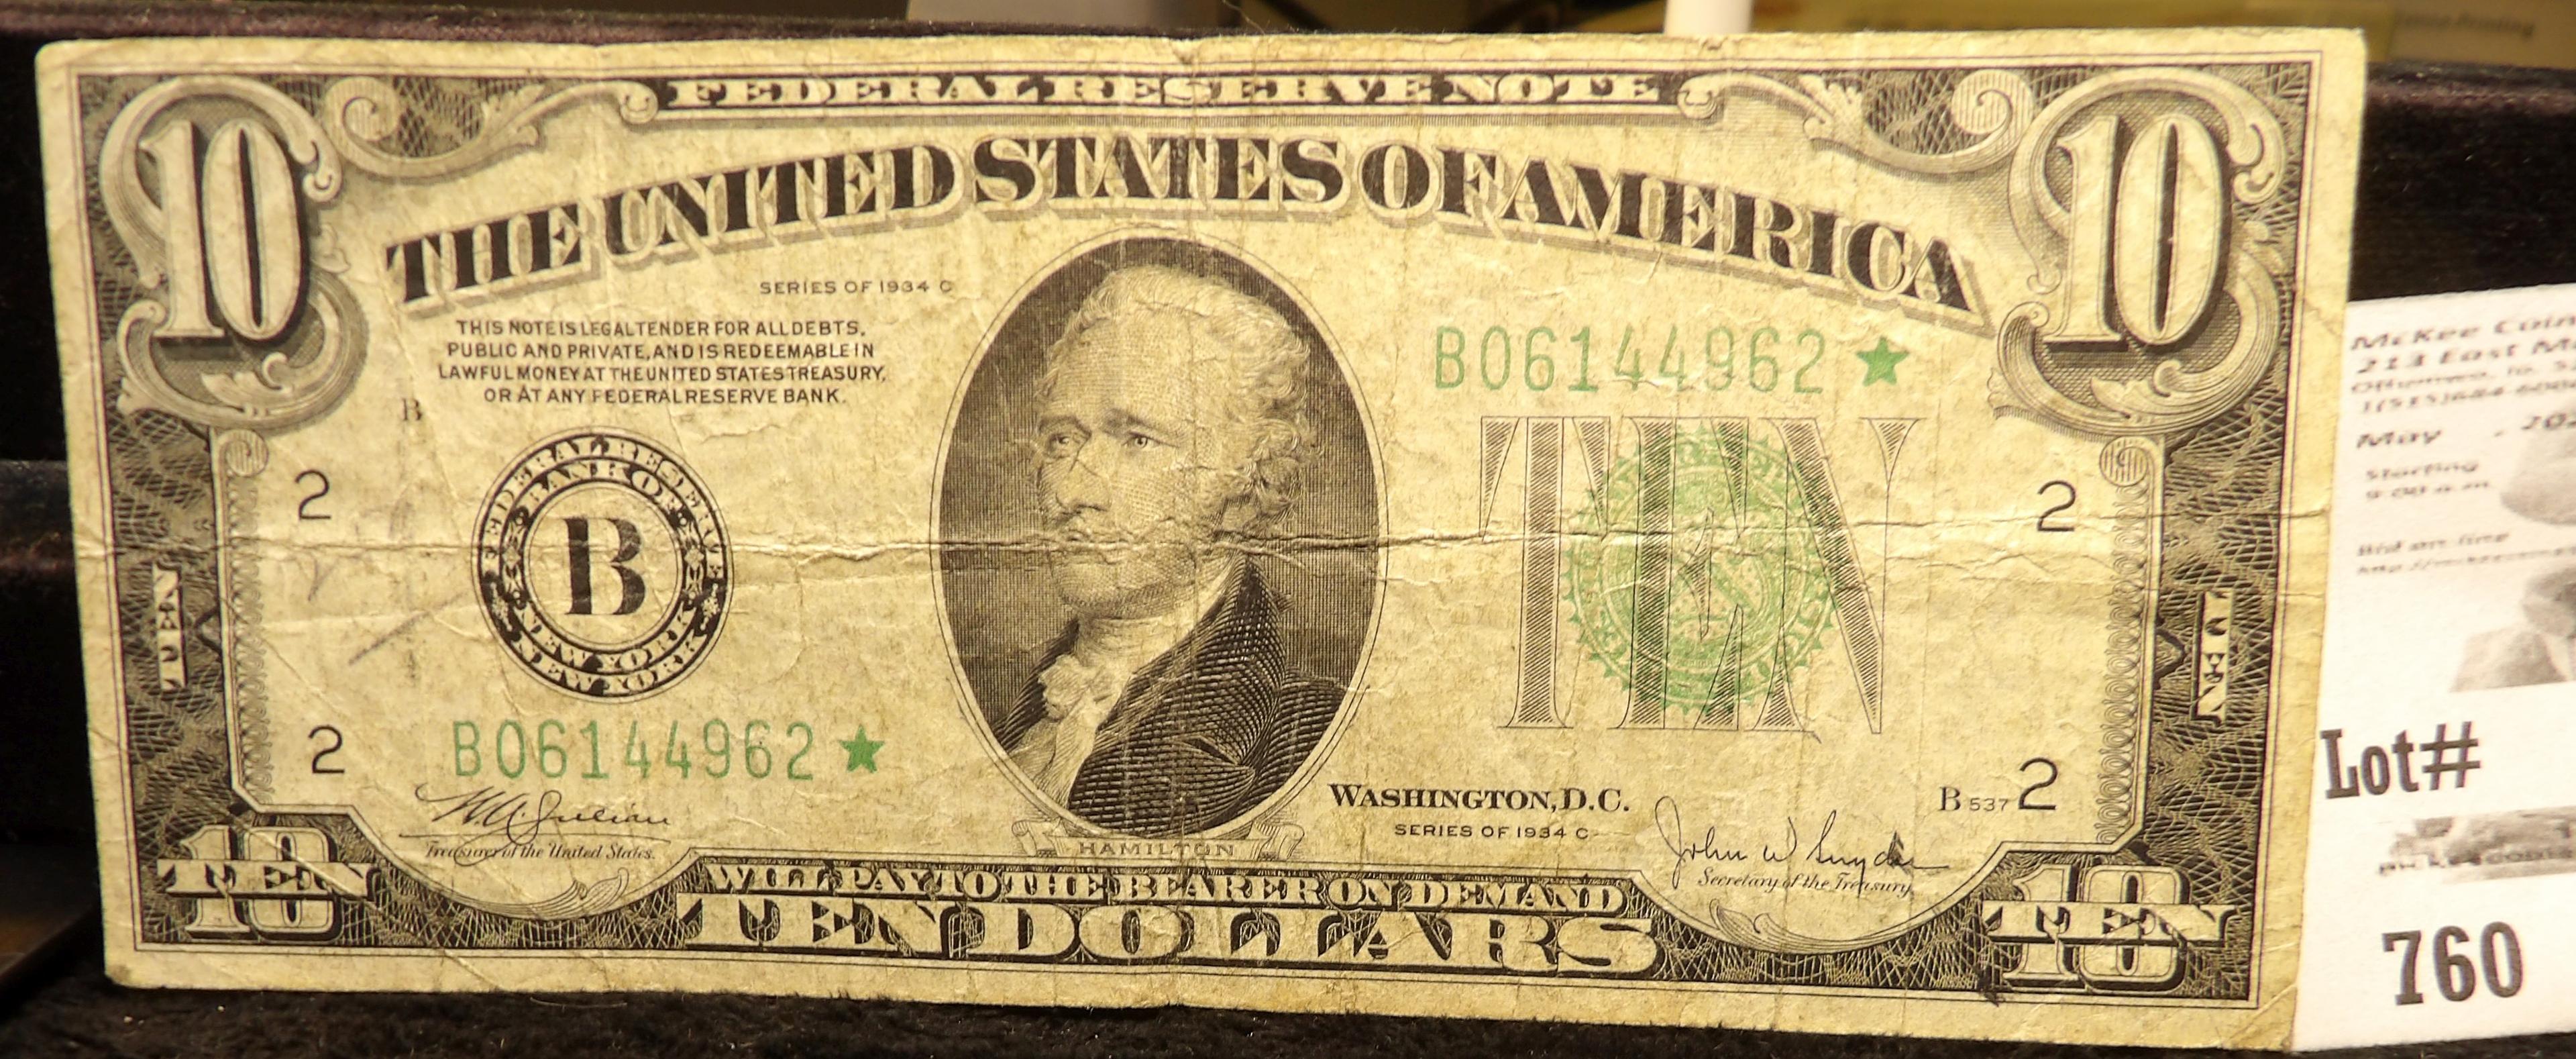 Series 1934C $10 Federal Reserve Note. Star Replacement. "B" New York, New York, Green Seal.